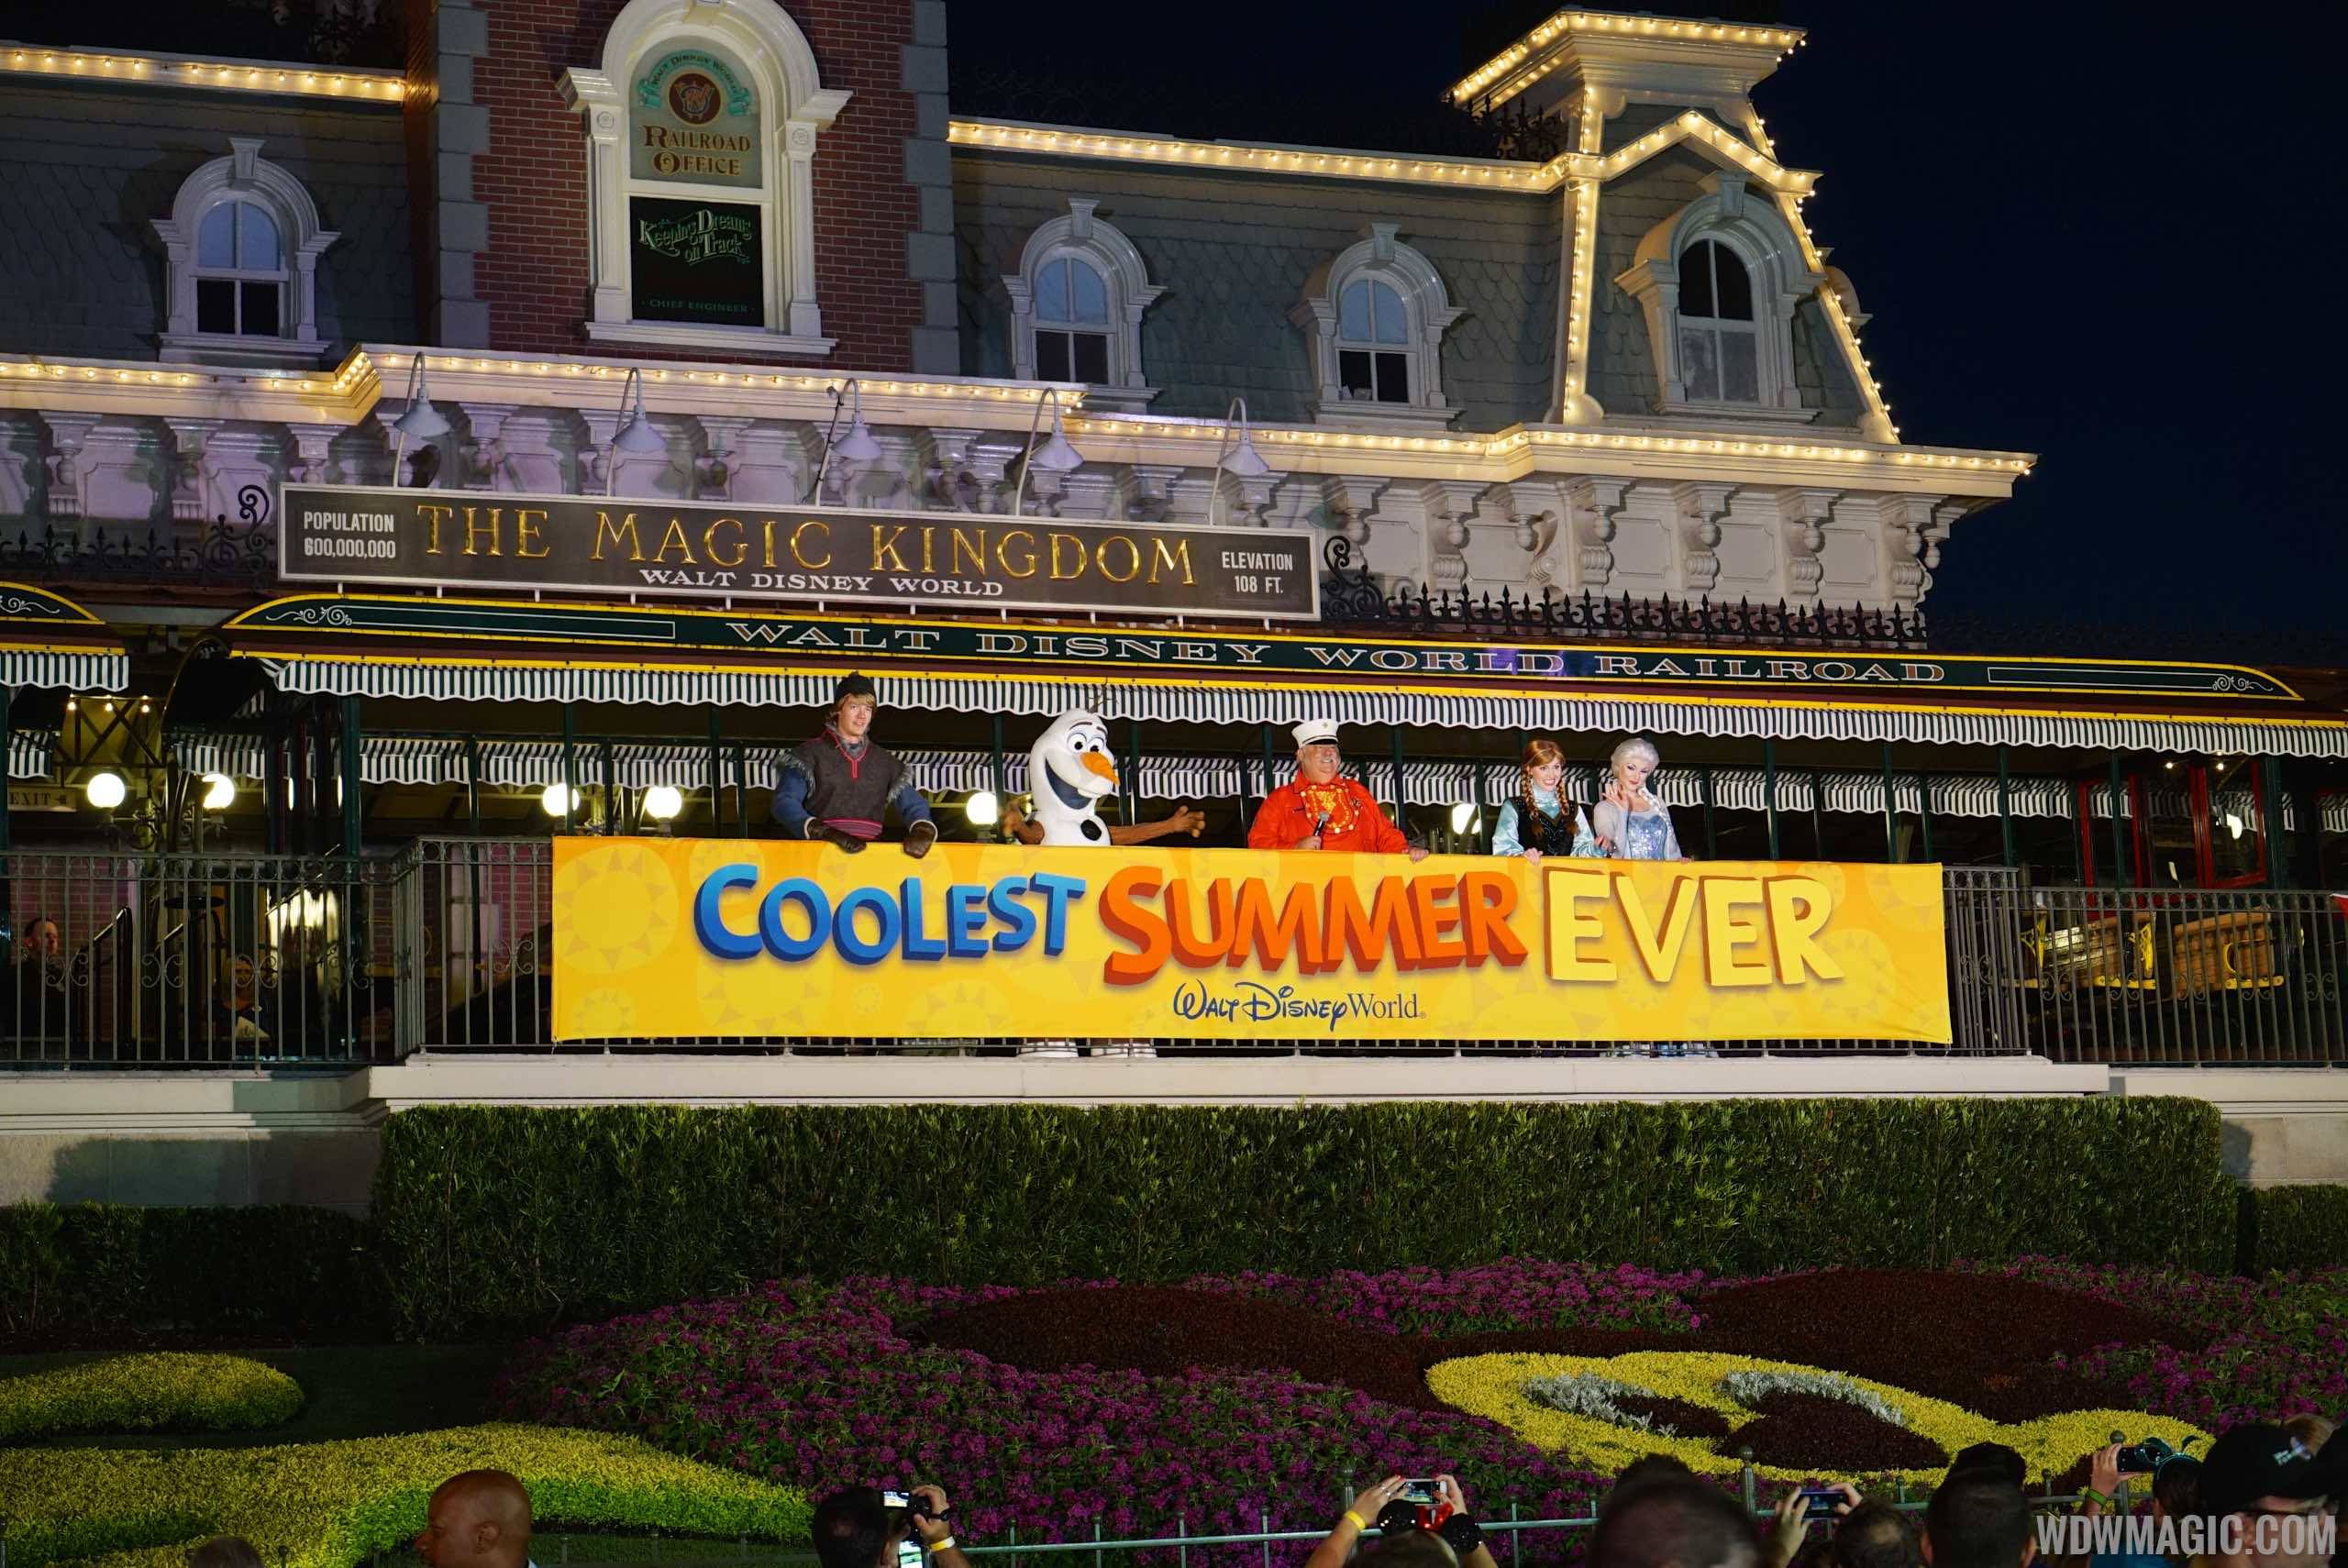 VIDEO - Anna, Elsa, Olaf and Kristoff welcome guests to the Magic Kingdom 24 hour 'Coolest Summer Ever' event